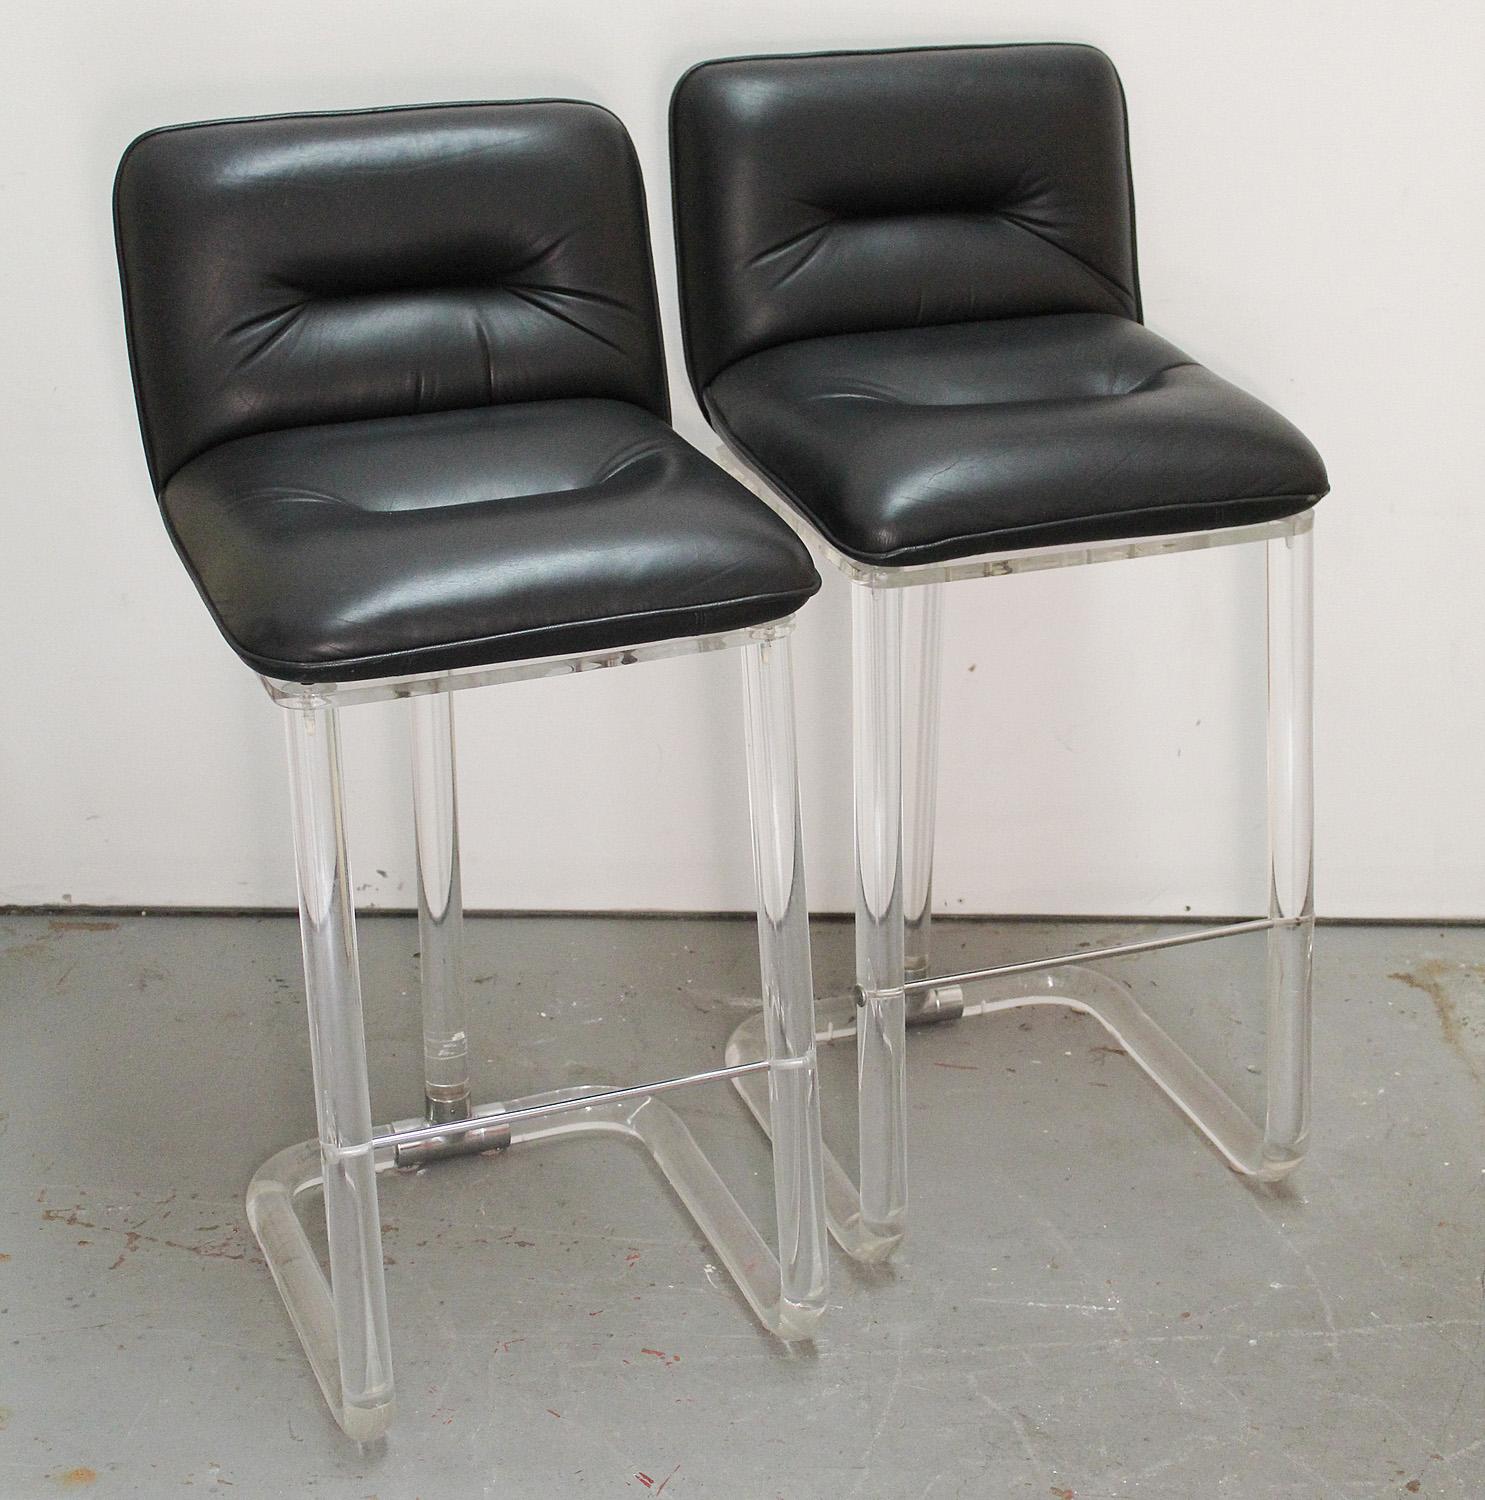 Timeless pair of black leather, lucite, and chrome swivel bar stools 
by Leon Frost for Lion in Frost. 

Expand your exiting collection or add to a small bar/ eating area.